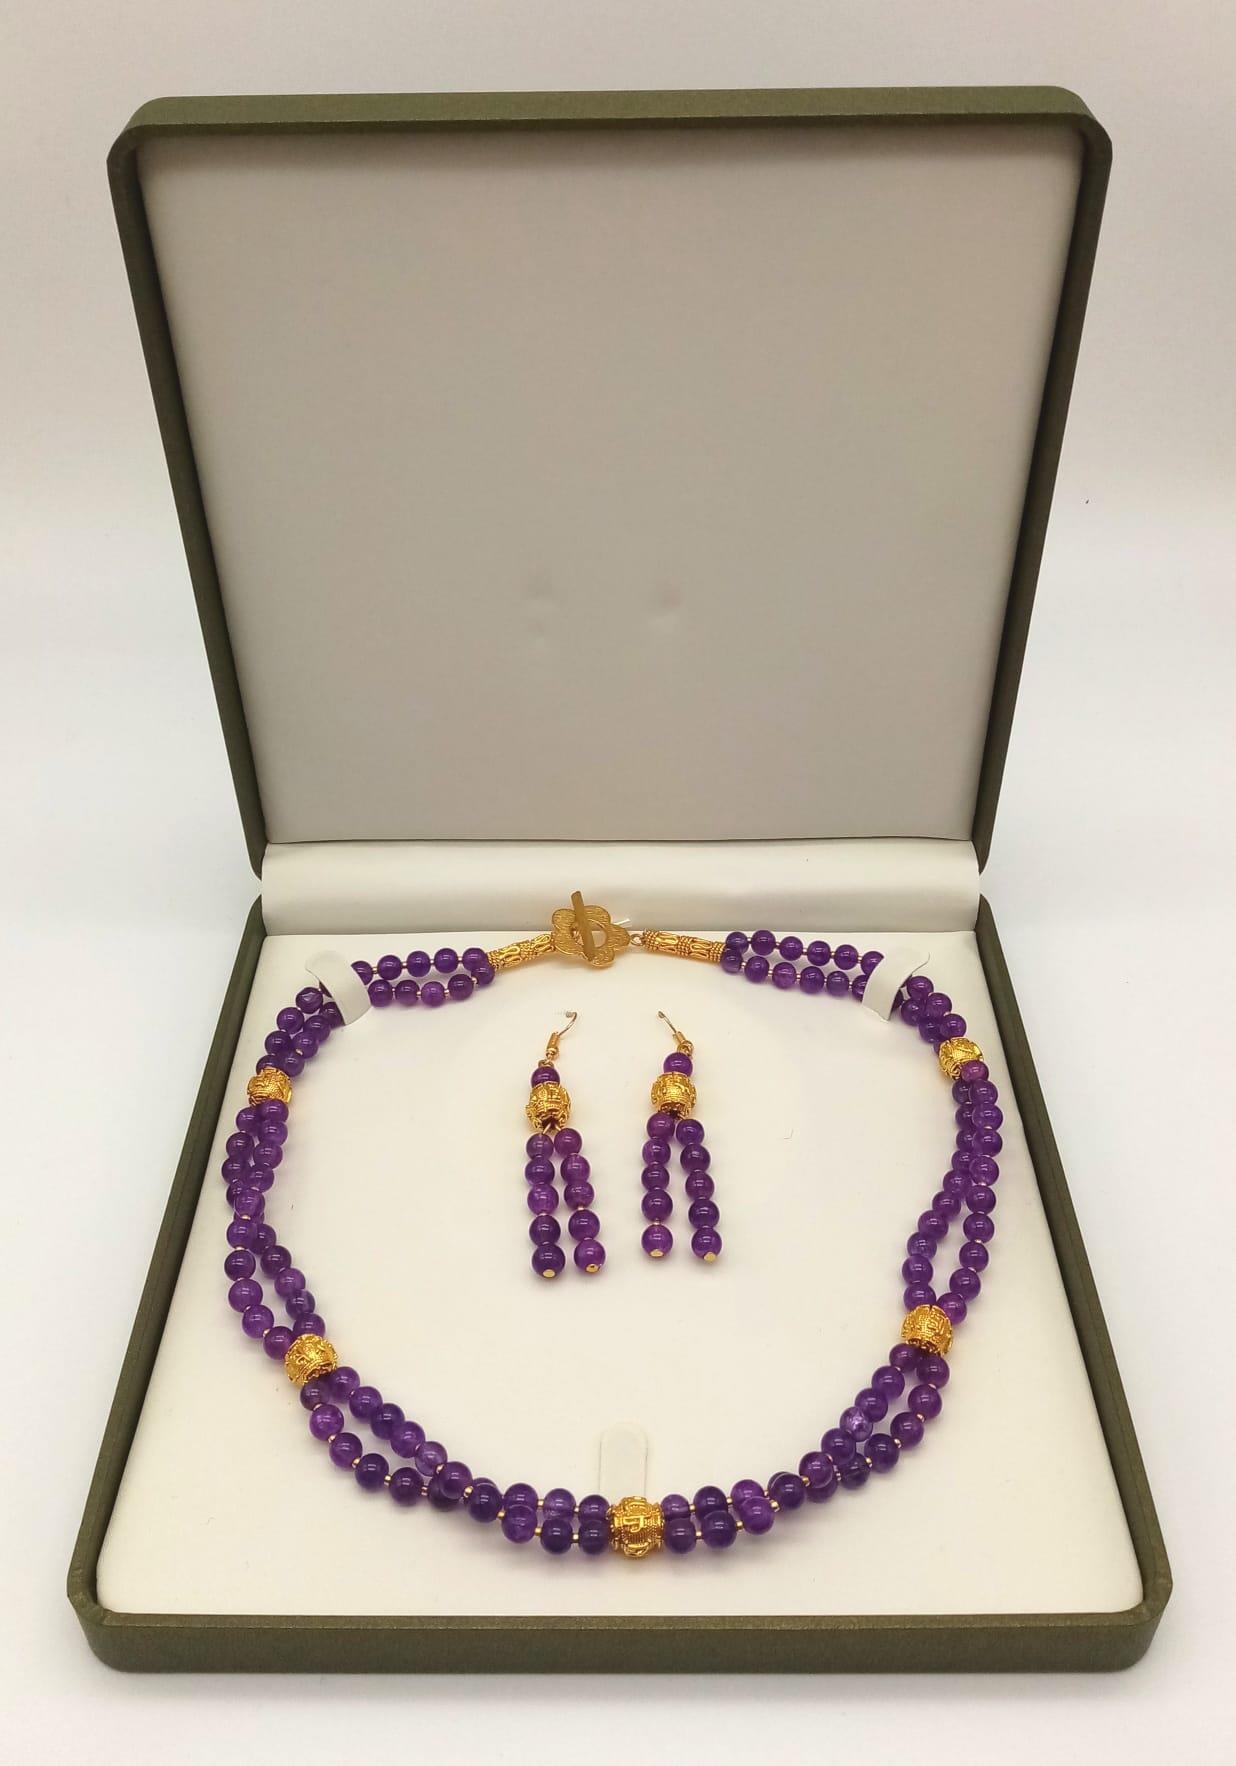 A double row of round amethysts necklace and earrings set with 18 K yellow gold plated highlights. - Image 12 of 12